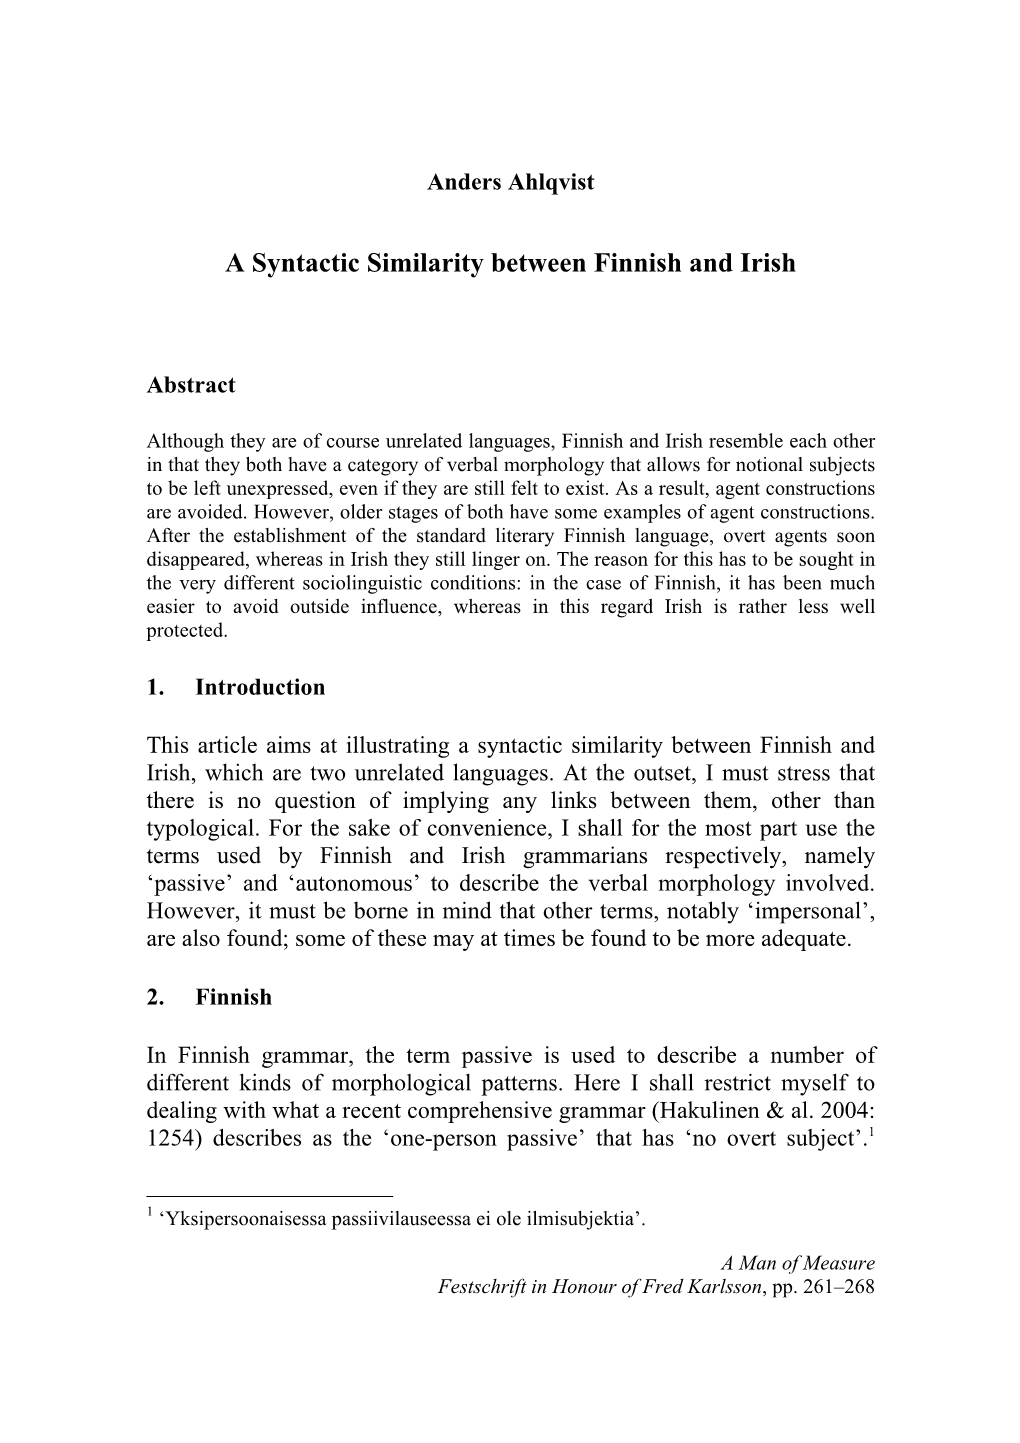 A Syntactic Similarity Between Finnish and Irish